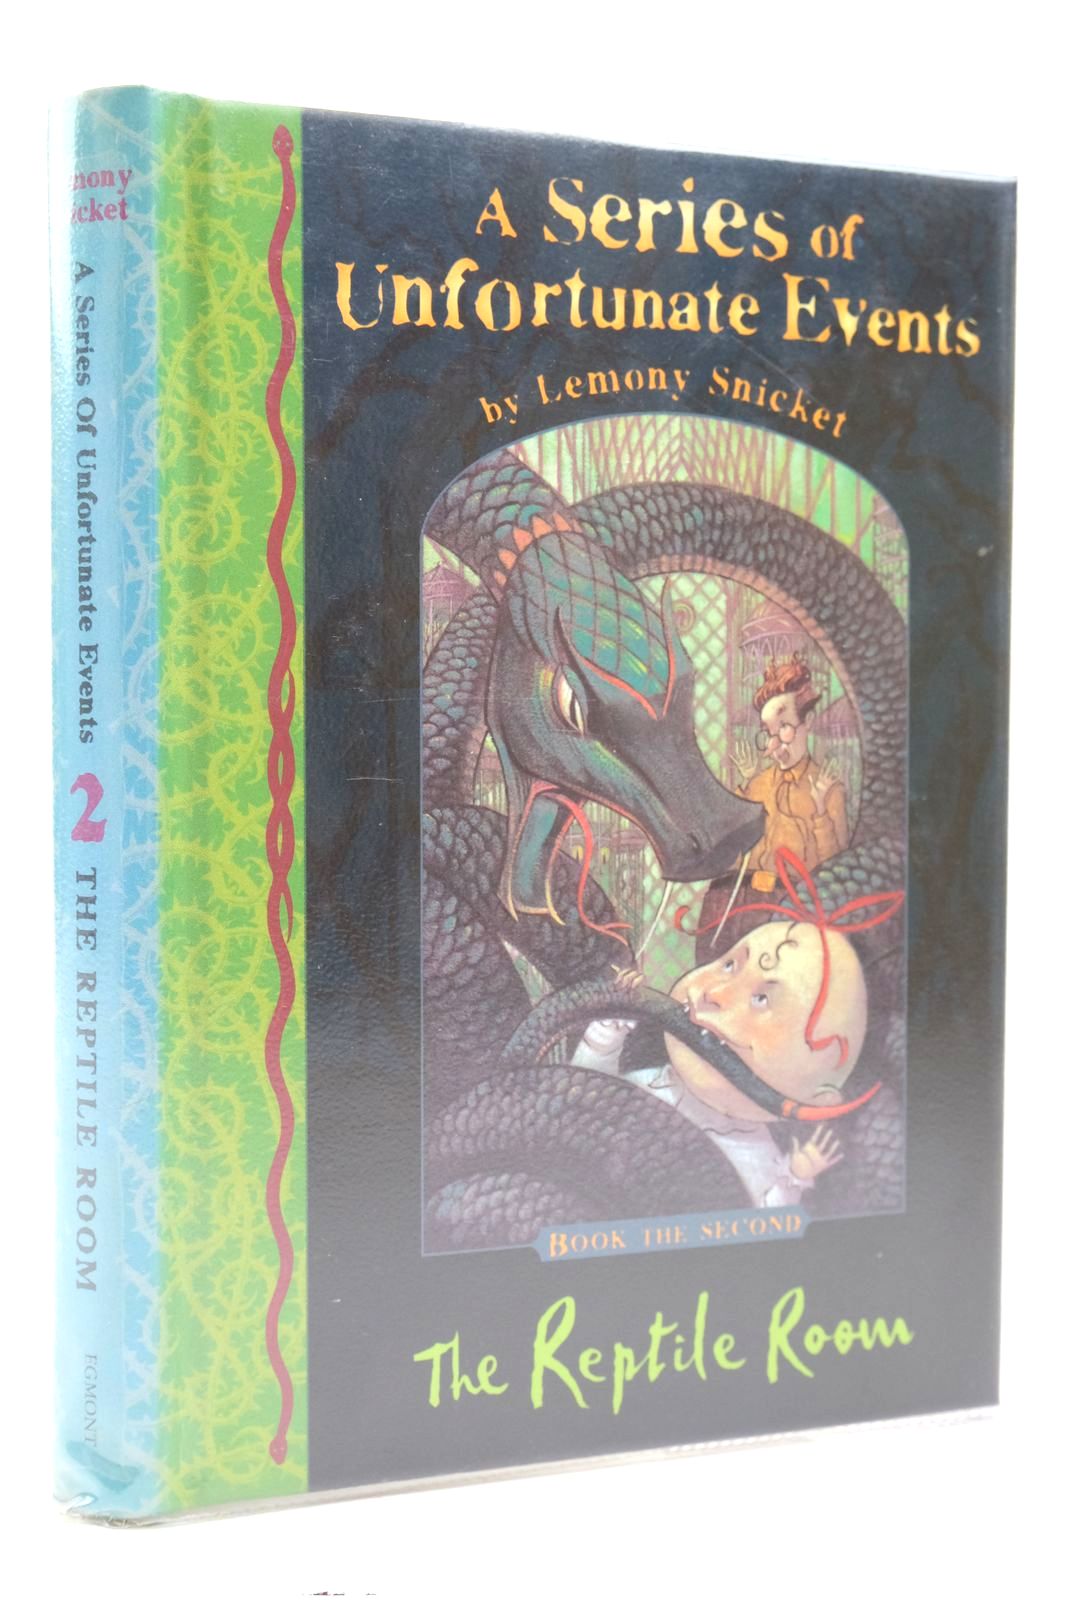 Photo of A SERIES OF UNFORTUNATE EVENTS: THE REPTILE ROOM written by Snicket, Lemony illustrated by Helquist, Brett published by Egmont Books Ltd. (STOCK CODE: 2139557)  for sale by Stella & Rose's Books